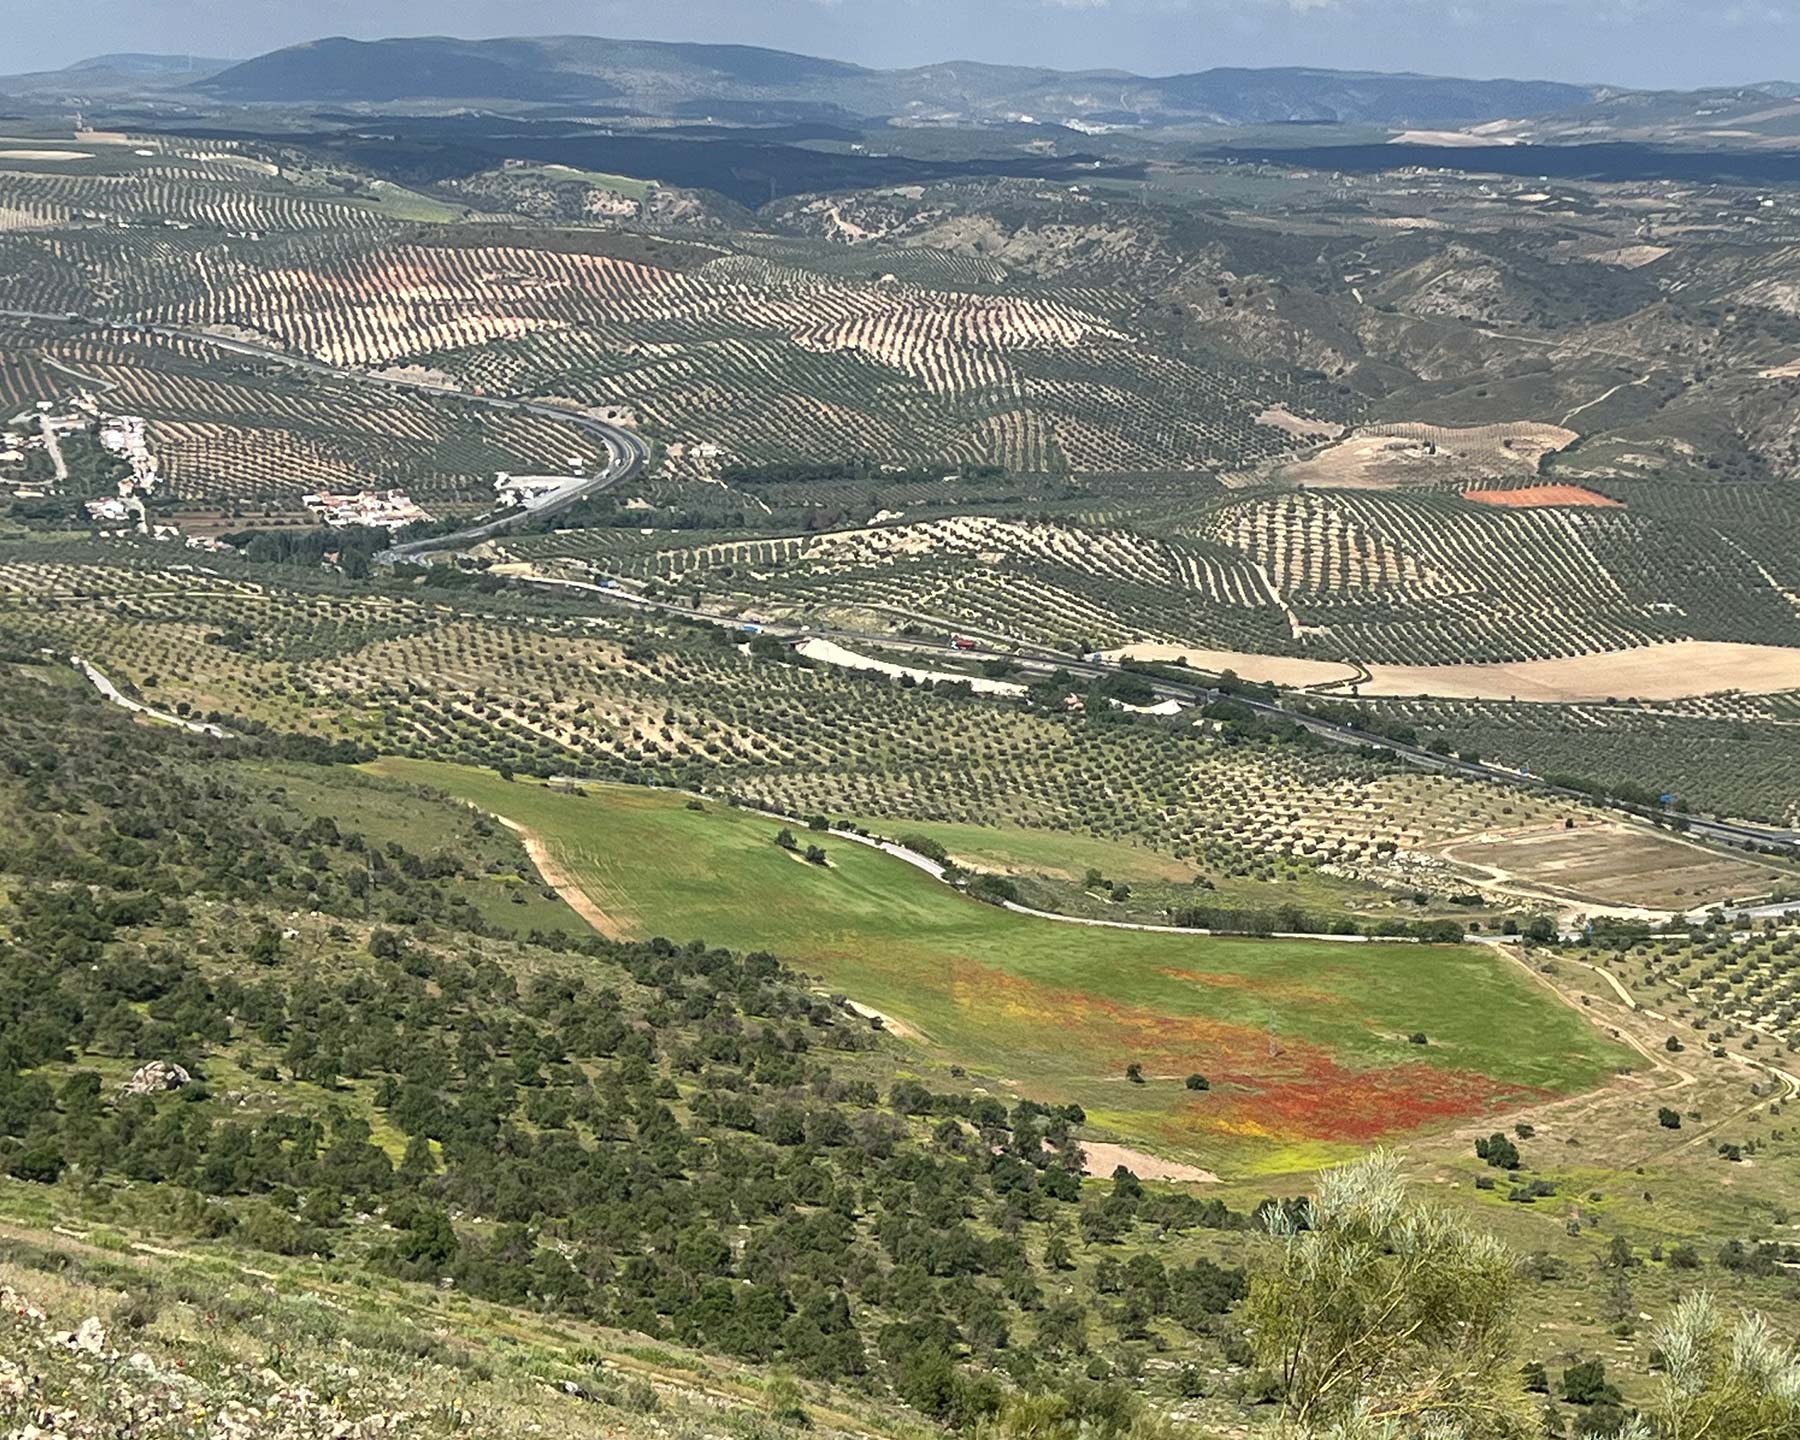 Looking down on a field of poppies, on the hills behind the olive groves of Southern Spain